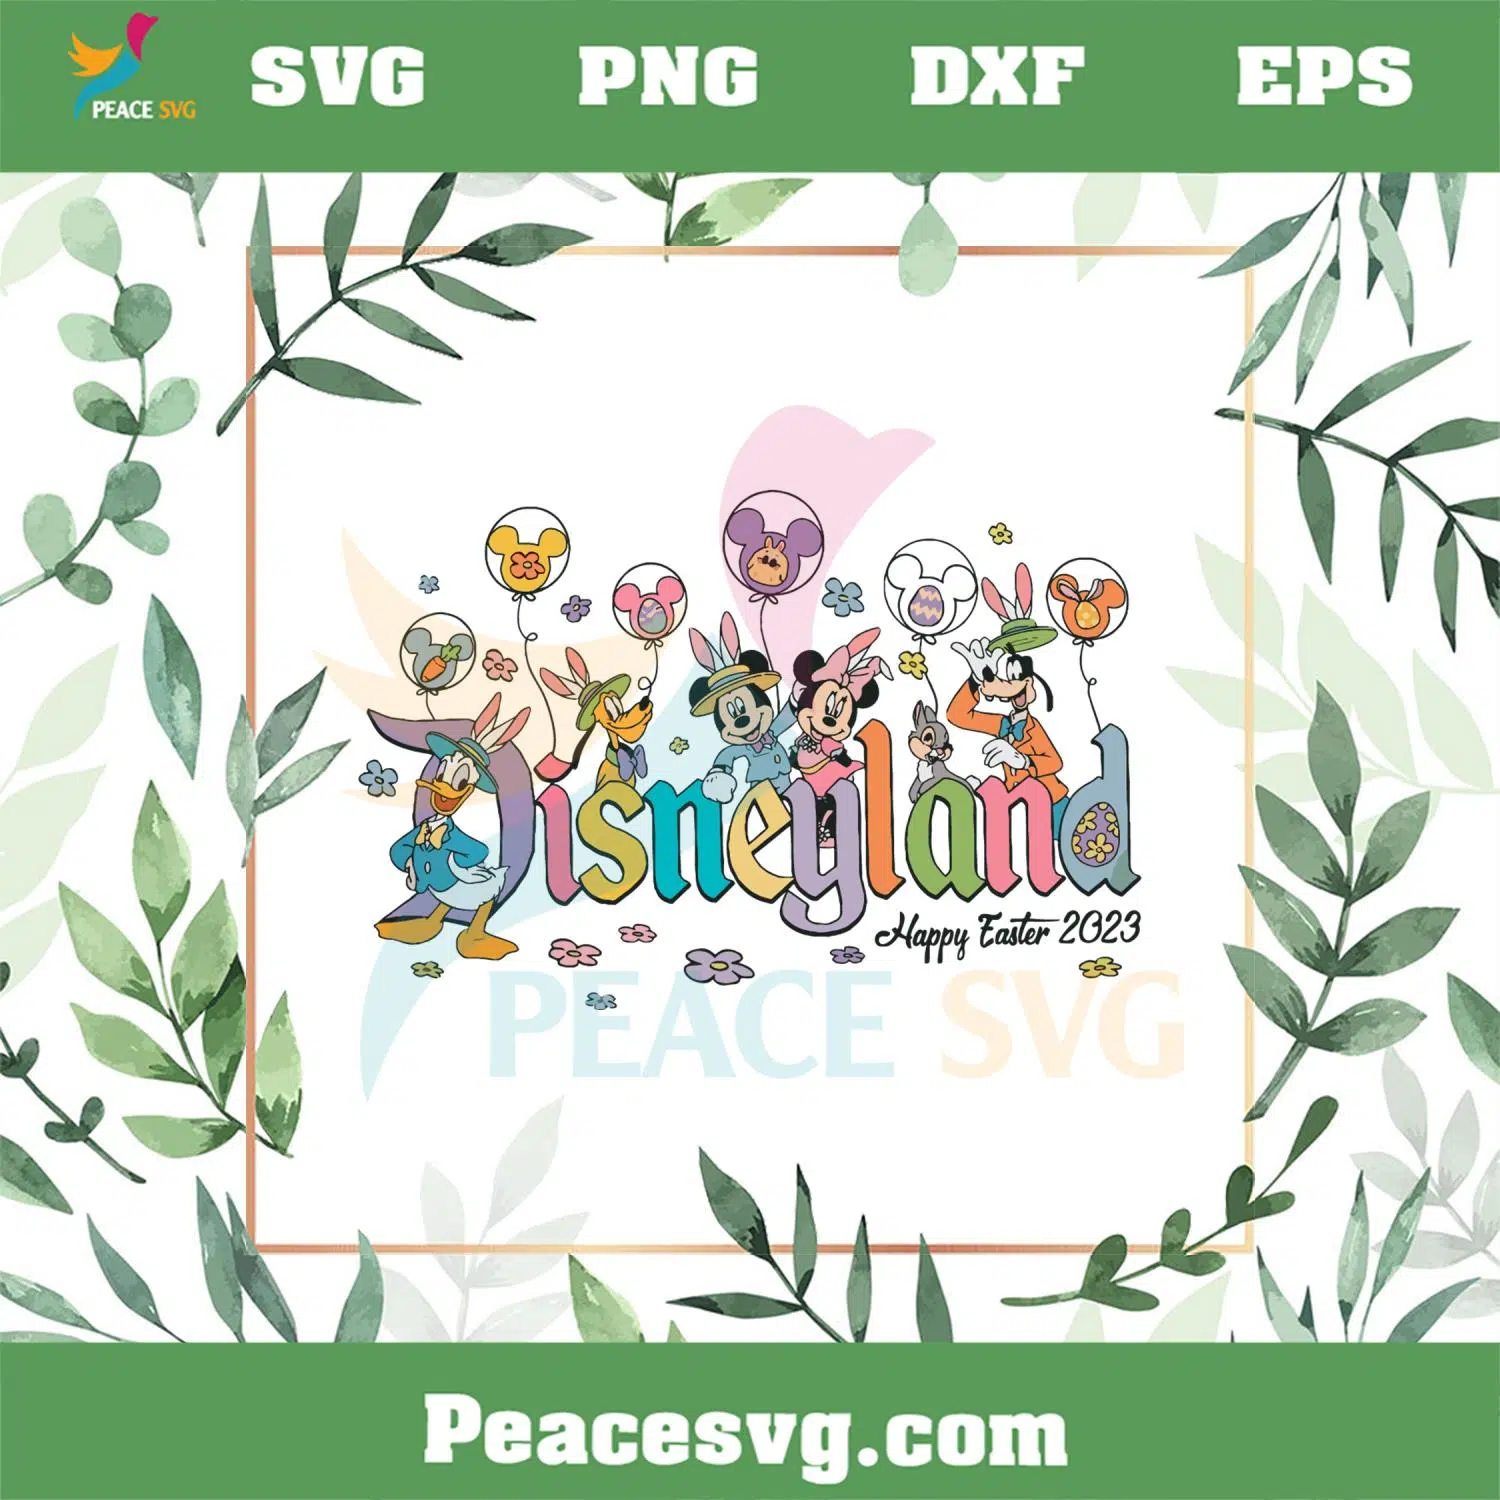 Happy Easter 2023 Disneyland SVG Floral Mickey and Friend SVG